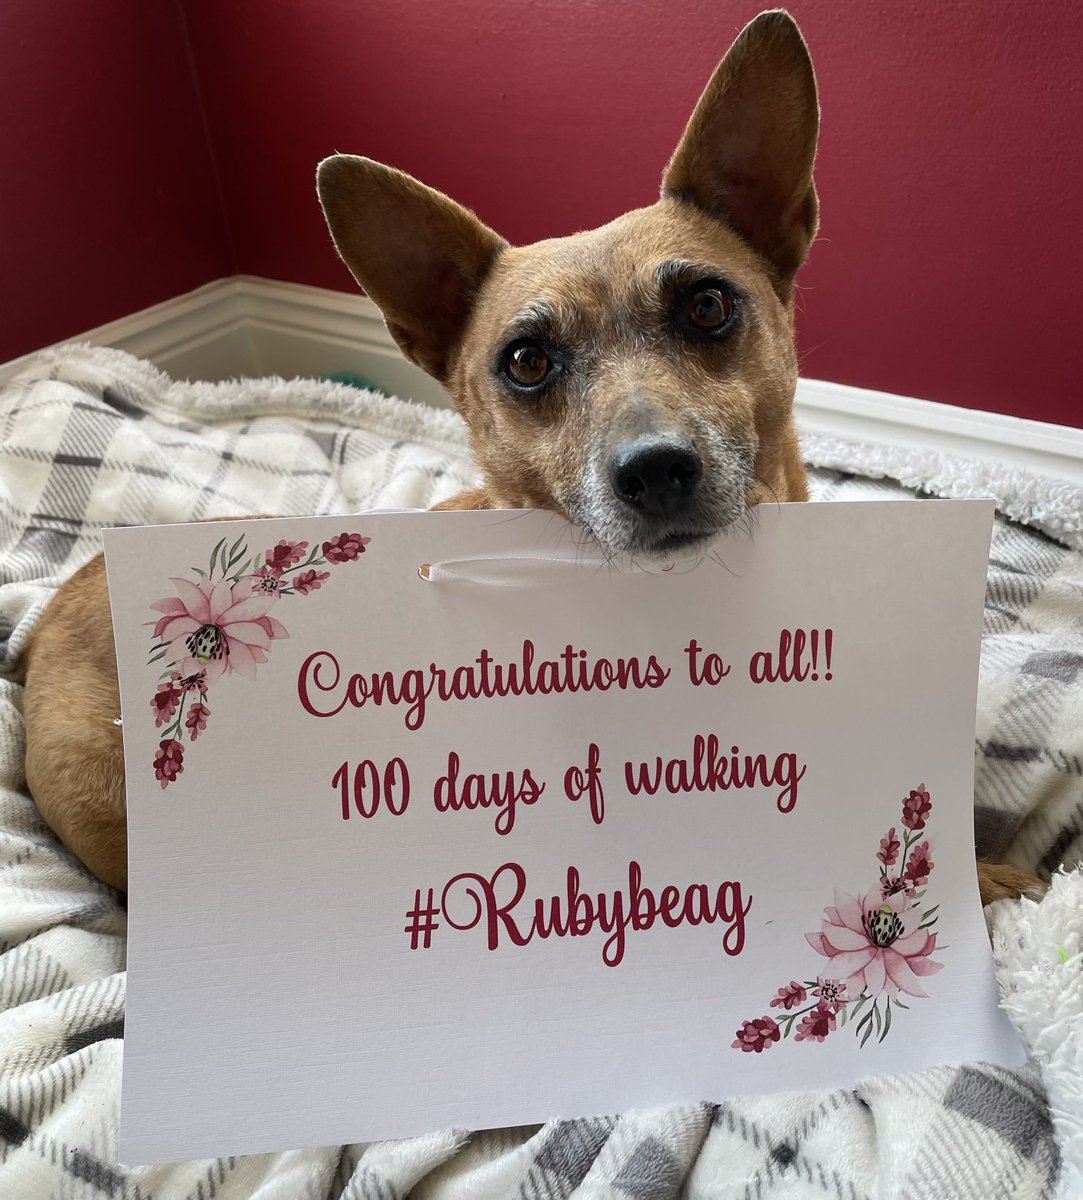 Beautiful evening in #Donegal for our walk on day 100/100 days of walking with #Rubybeag. Congratulations 🥳 to my fellow walkers, thanks for all the interactions we have a lovely community. Particular thanks to ⁦@welovedonegal⁩ for all the wonderful memes of #Rubybeag 🥰